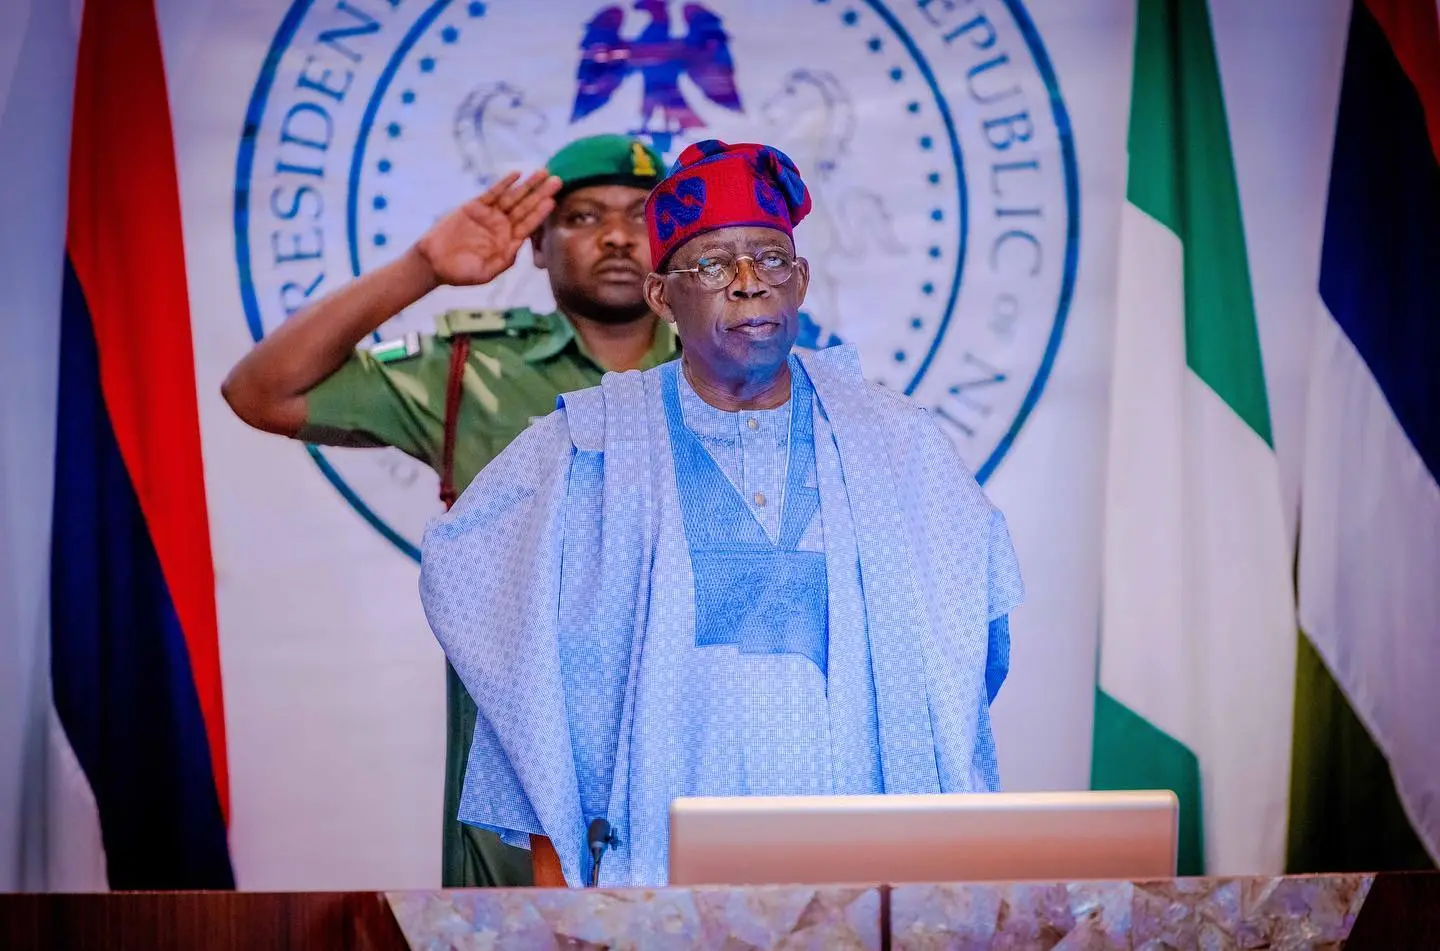 President Tinubu: A 1-year Irony disguised as an Anniversary